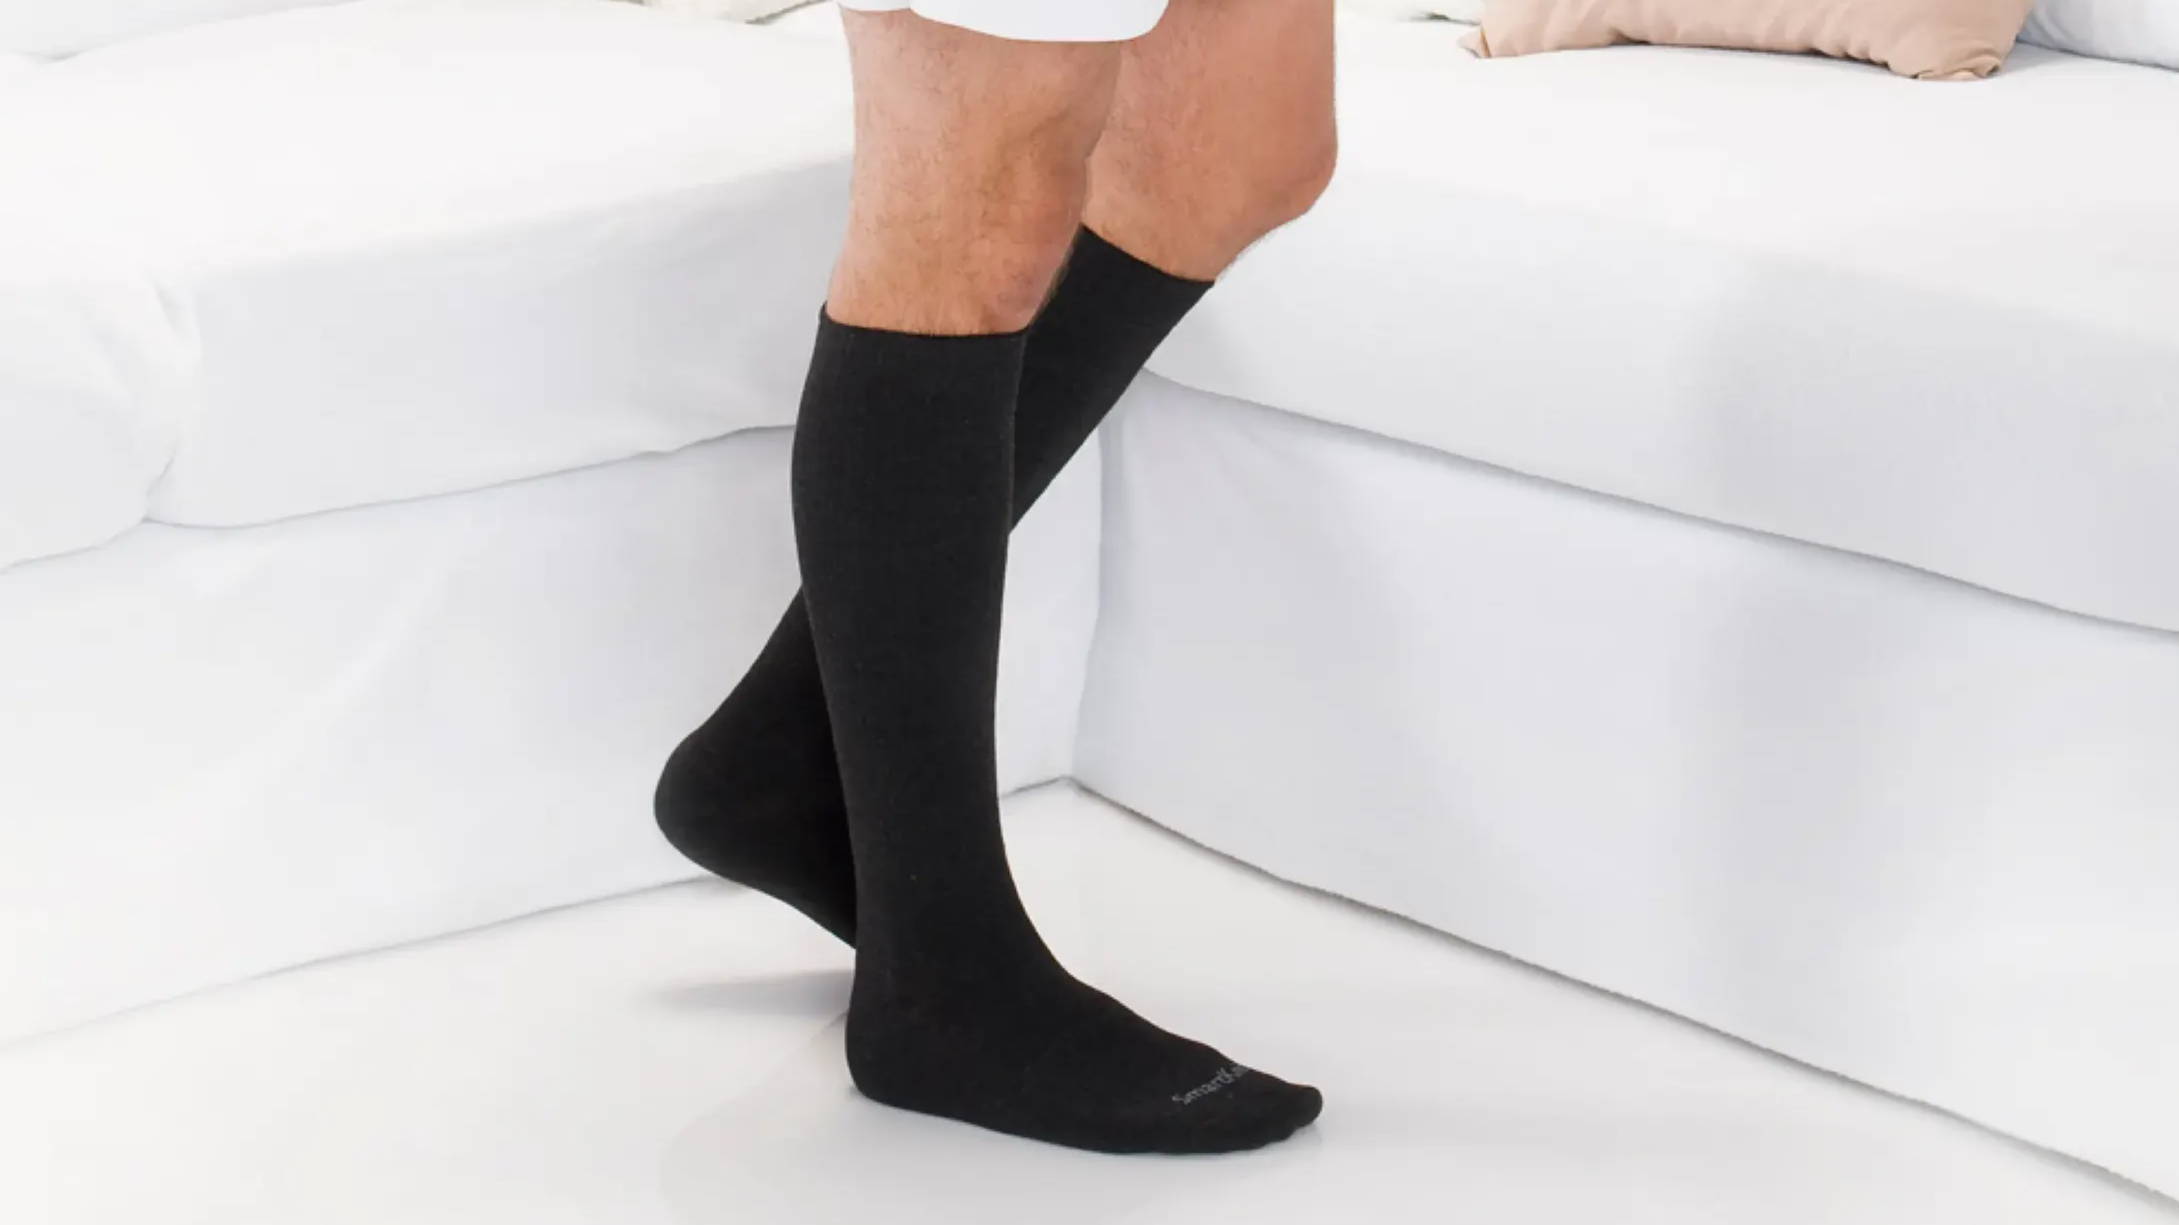 Woman wearing SmartKnit Seamless Socks that reduce pressure points and irritation. Eliminated wrinkling and bunching. Moisture-wicking. Non-binding. Ideal for diabetics.